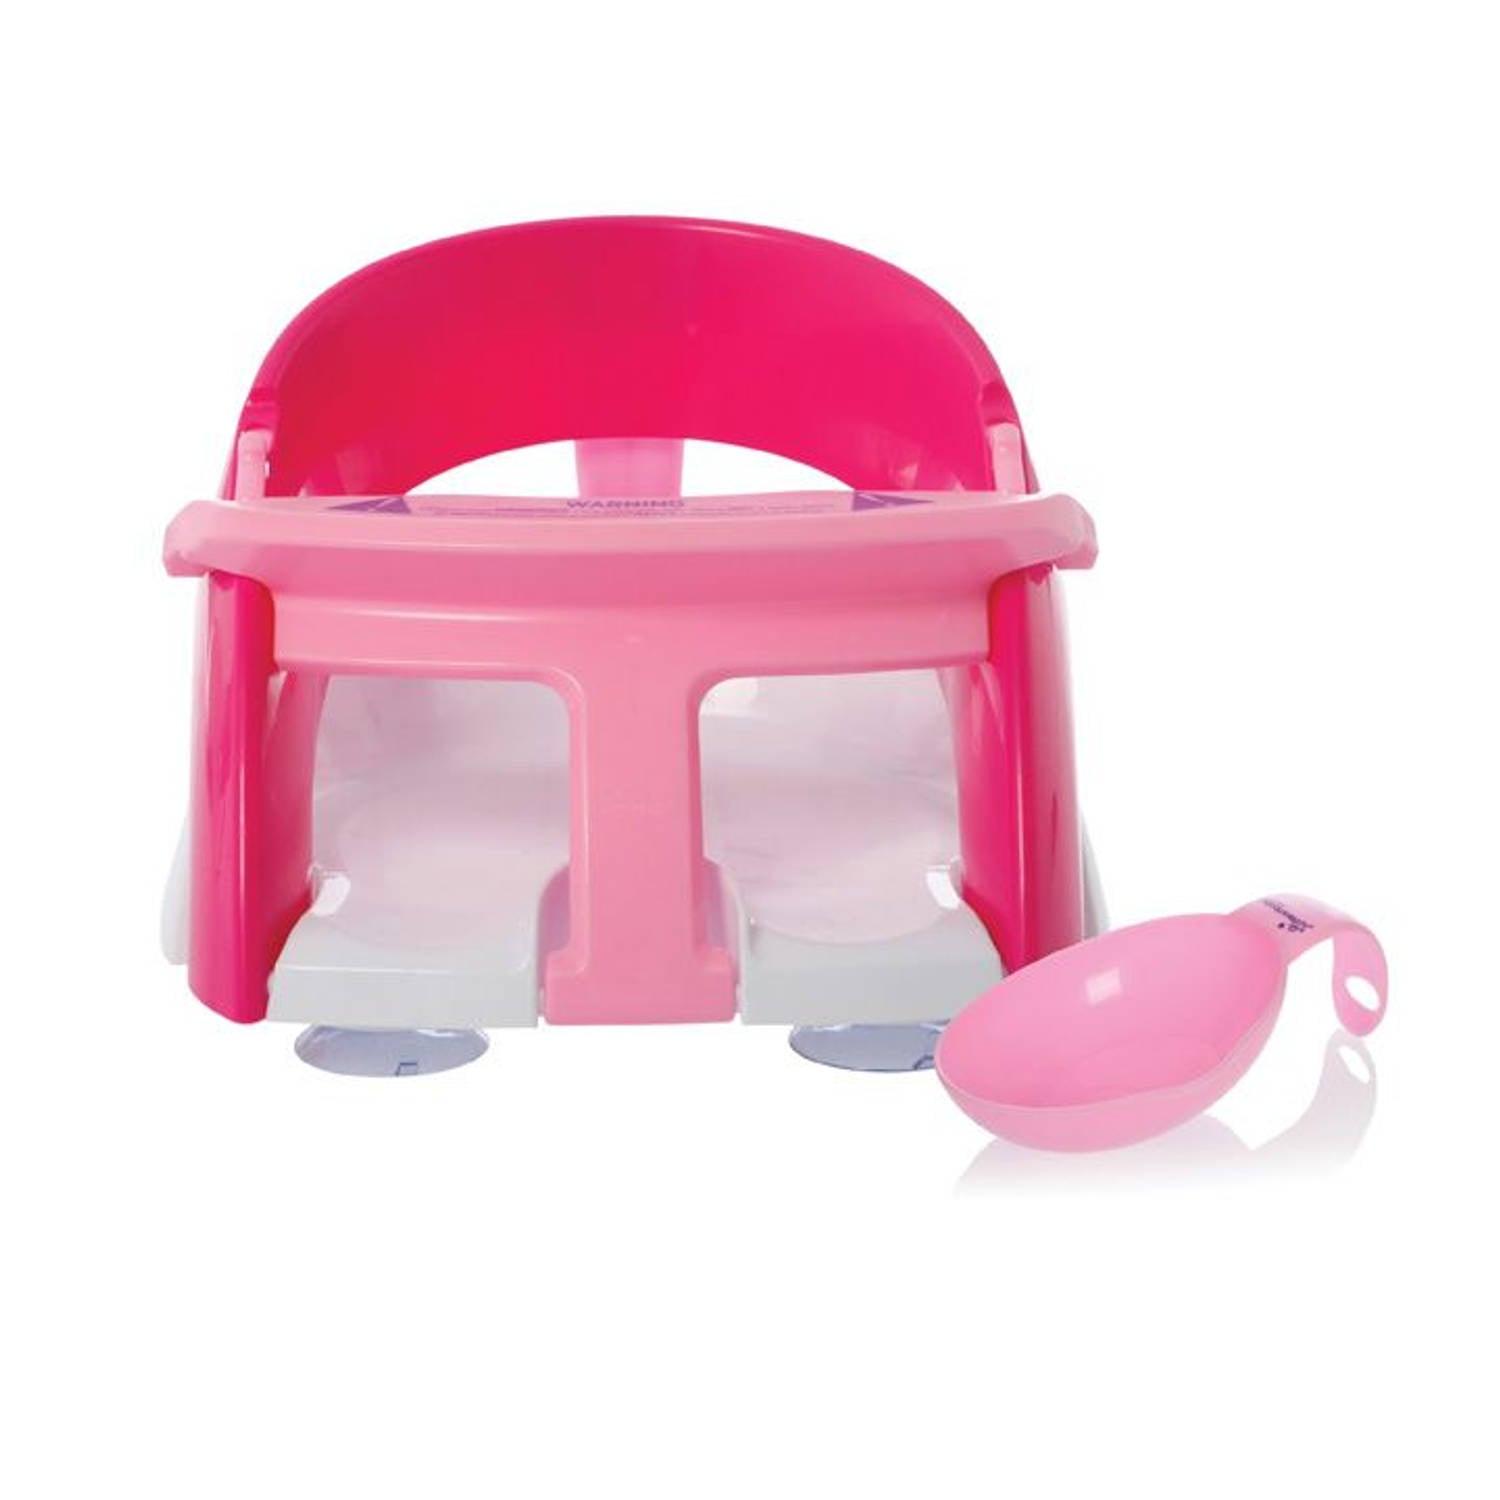 Dreambaby Bath seat with Handy Scoop - Pink